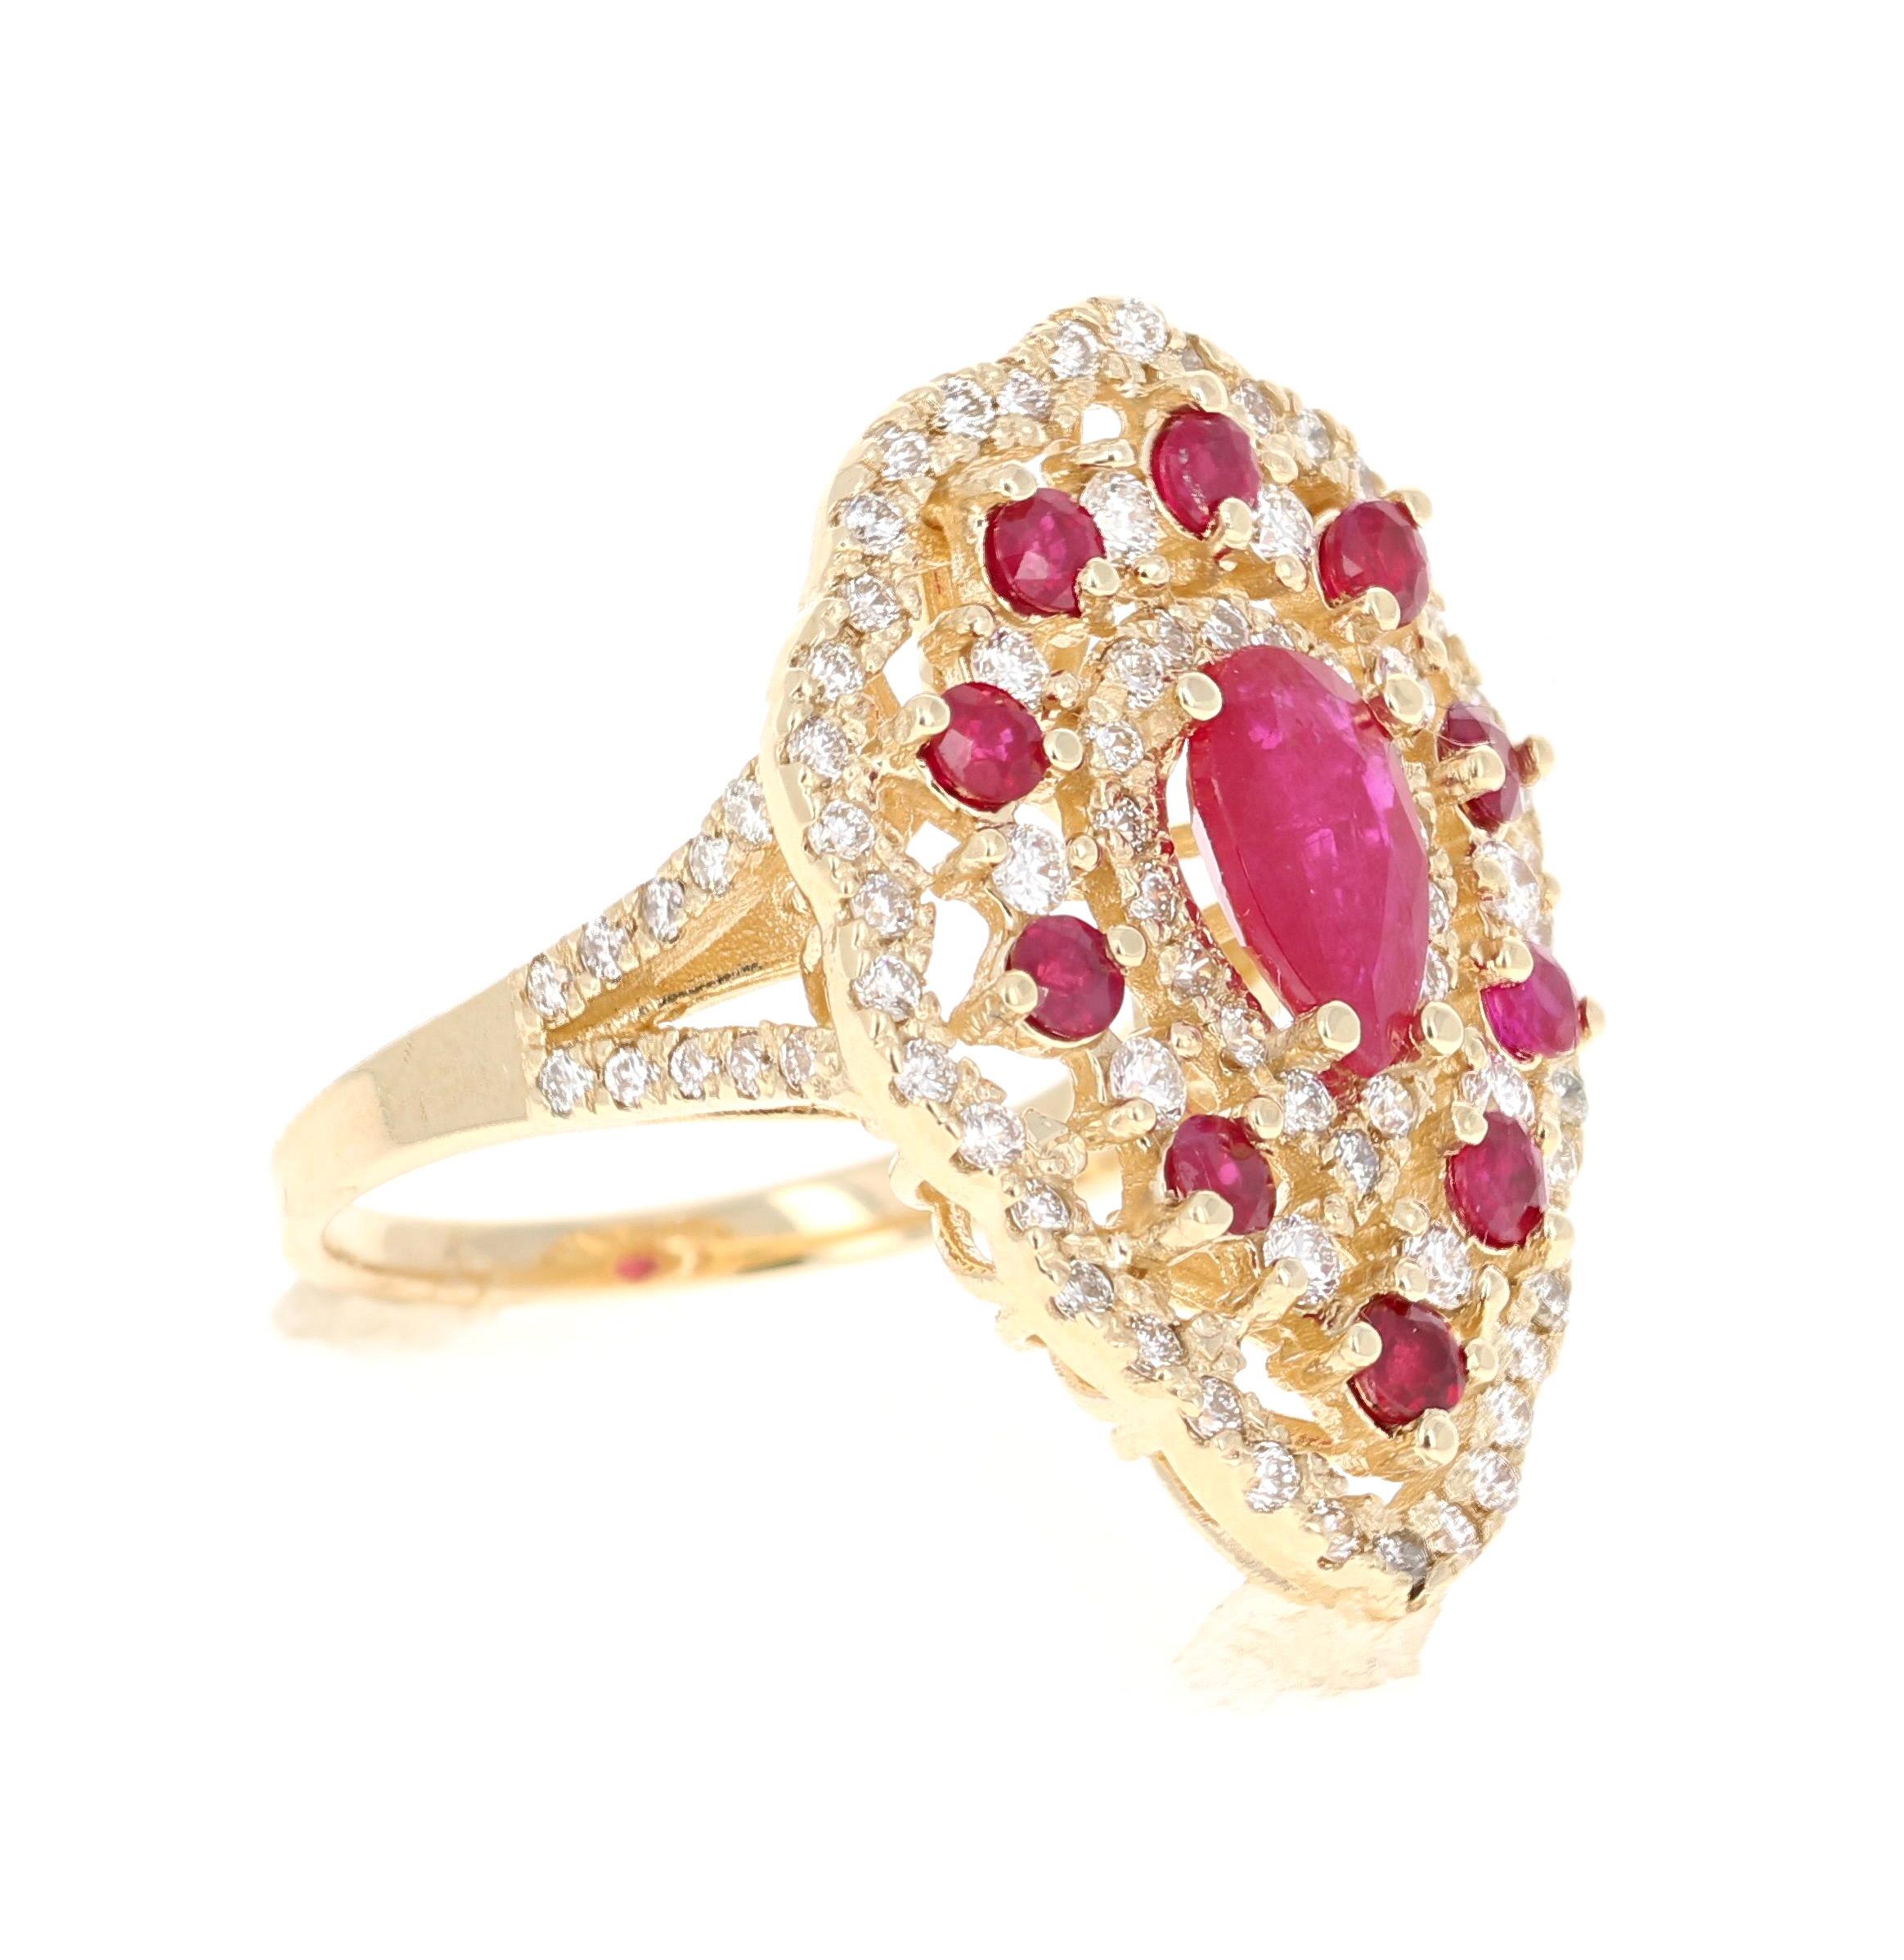 A real statement piece - 3.38 Carat Ruby and Diamond Cocktail Ring in 14K Yellow Gold!
This ring has a gorgeous 1.29 Carat Pear Cut Ruby set in the center that measures at 10 mm x 6 mm and is surrounded by 10 Round Cut Rubies that weigh 0.94 Carats,